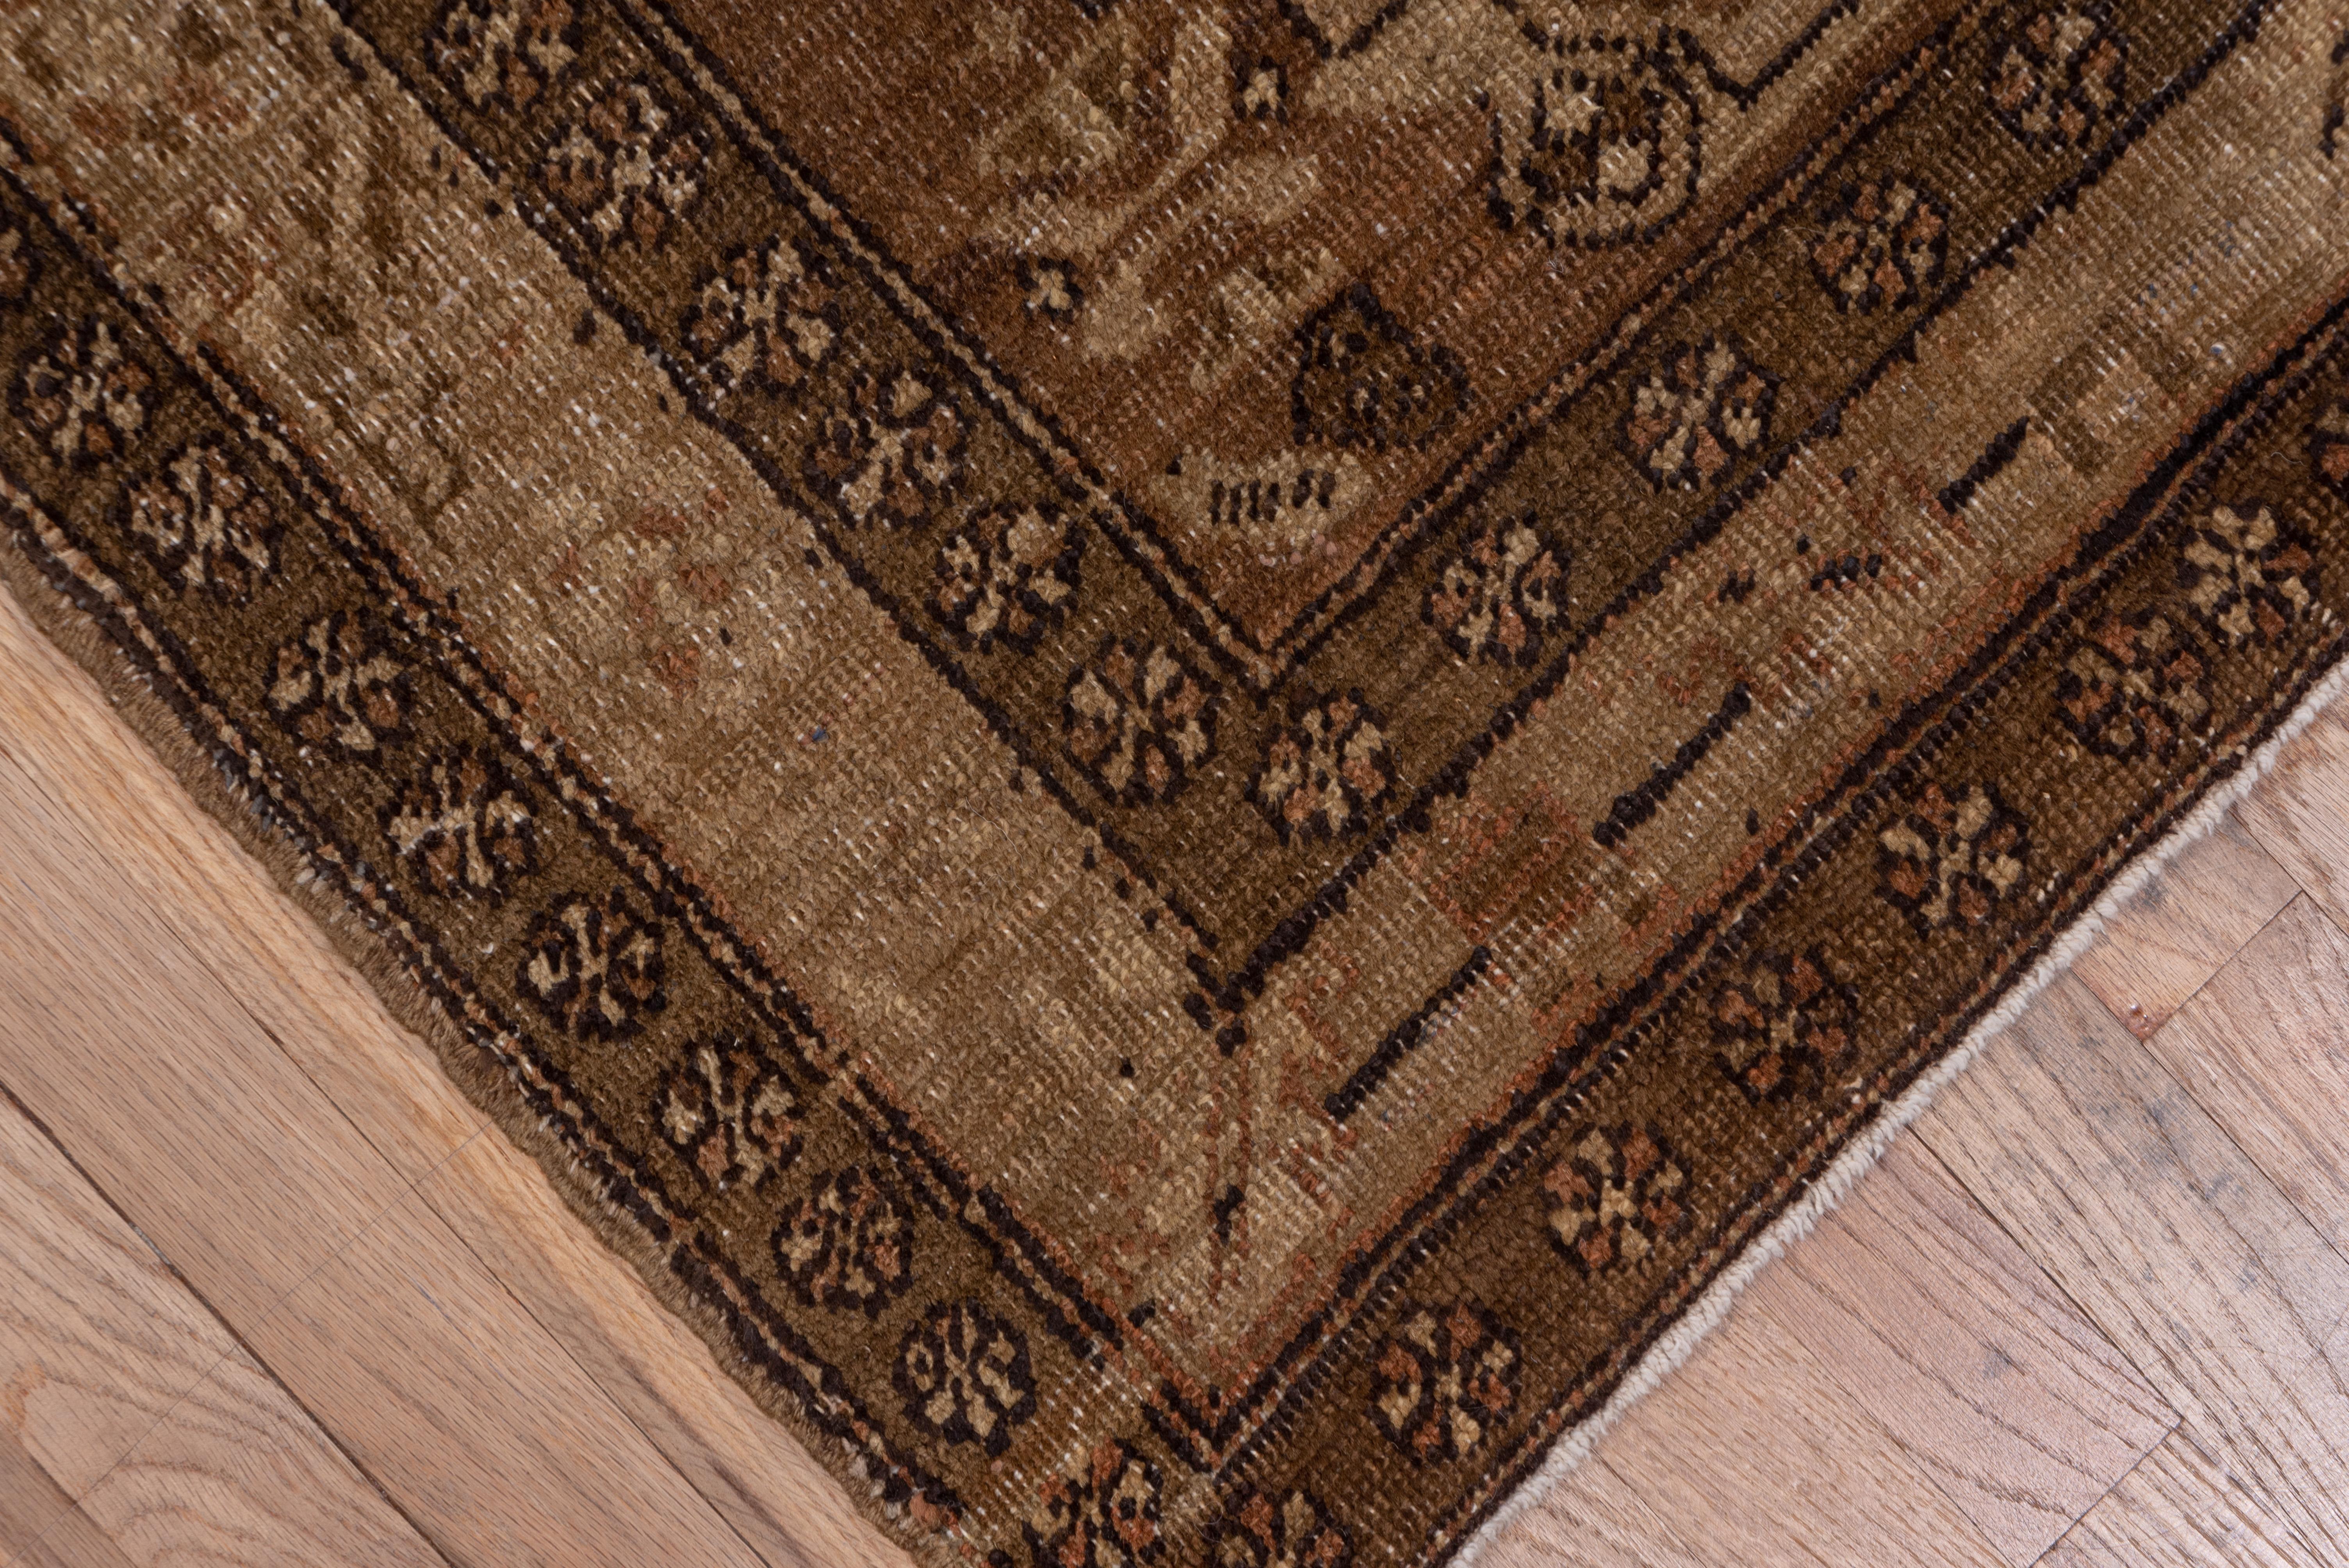 Mid-20th Century Antique Persian Heriz Runner, Brown Tone on Tone Field, circa 1930s For Sale